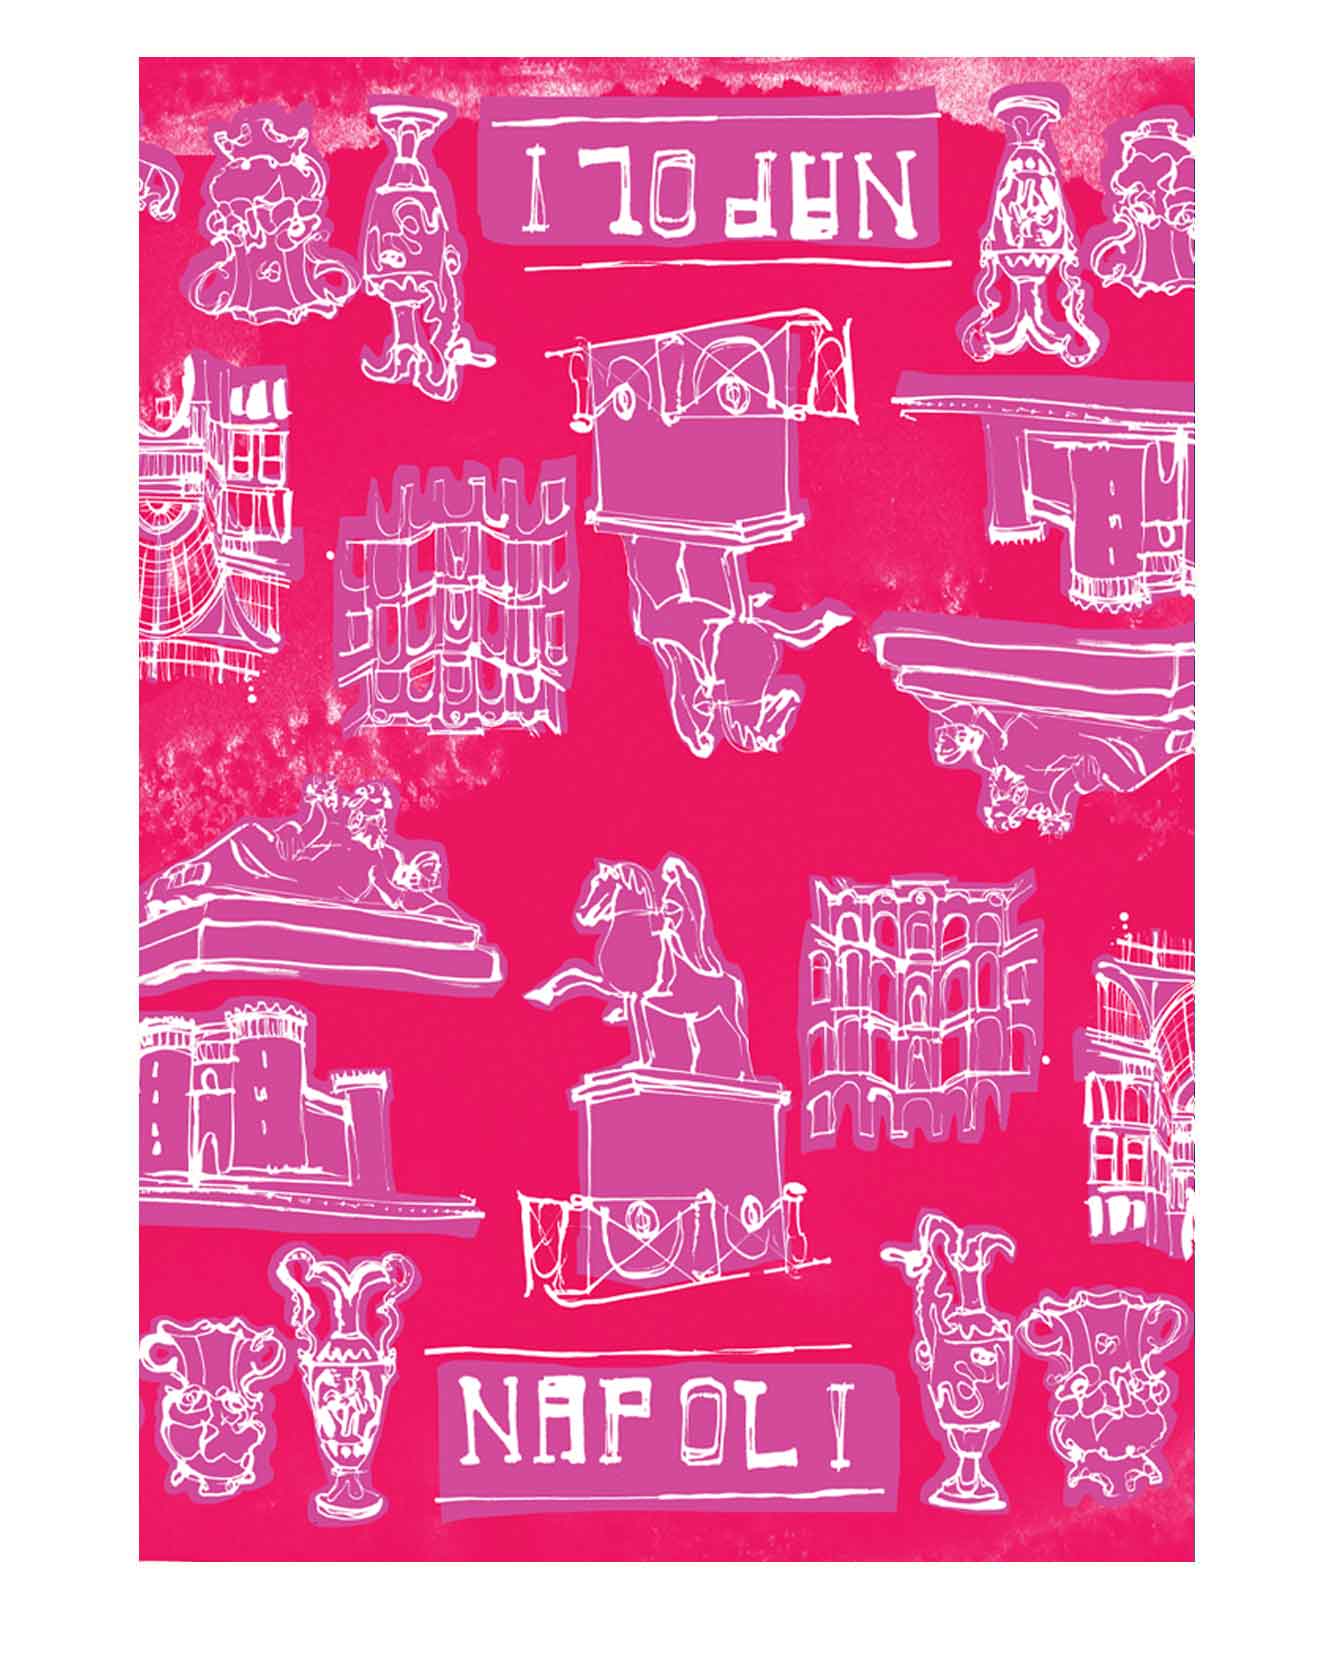 Detail. Full range of silk scarf illustration. Inspired by Italian city of Naples for fashion brand Kiton, who's headquarters are in the ancient Italian city. Simple linear style illustration and flat colours taken from the fashion houses upcoming collections. PInk tones. White line drawings.